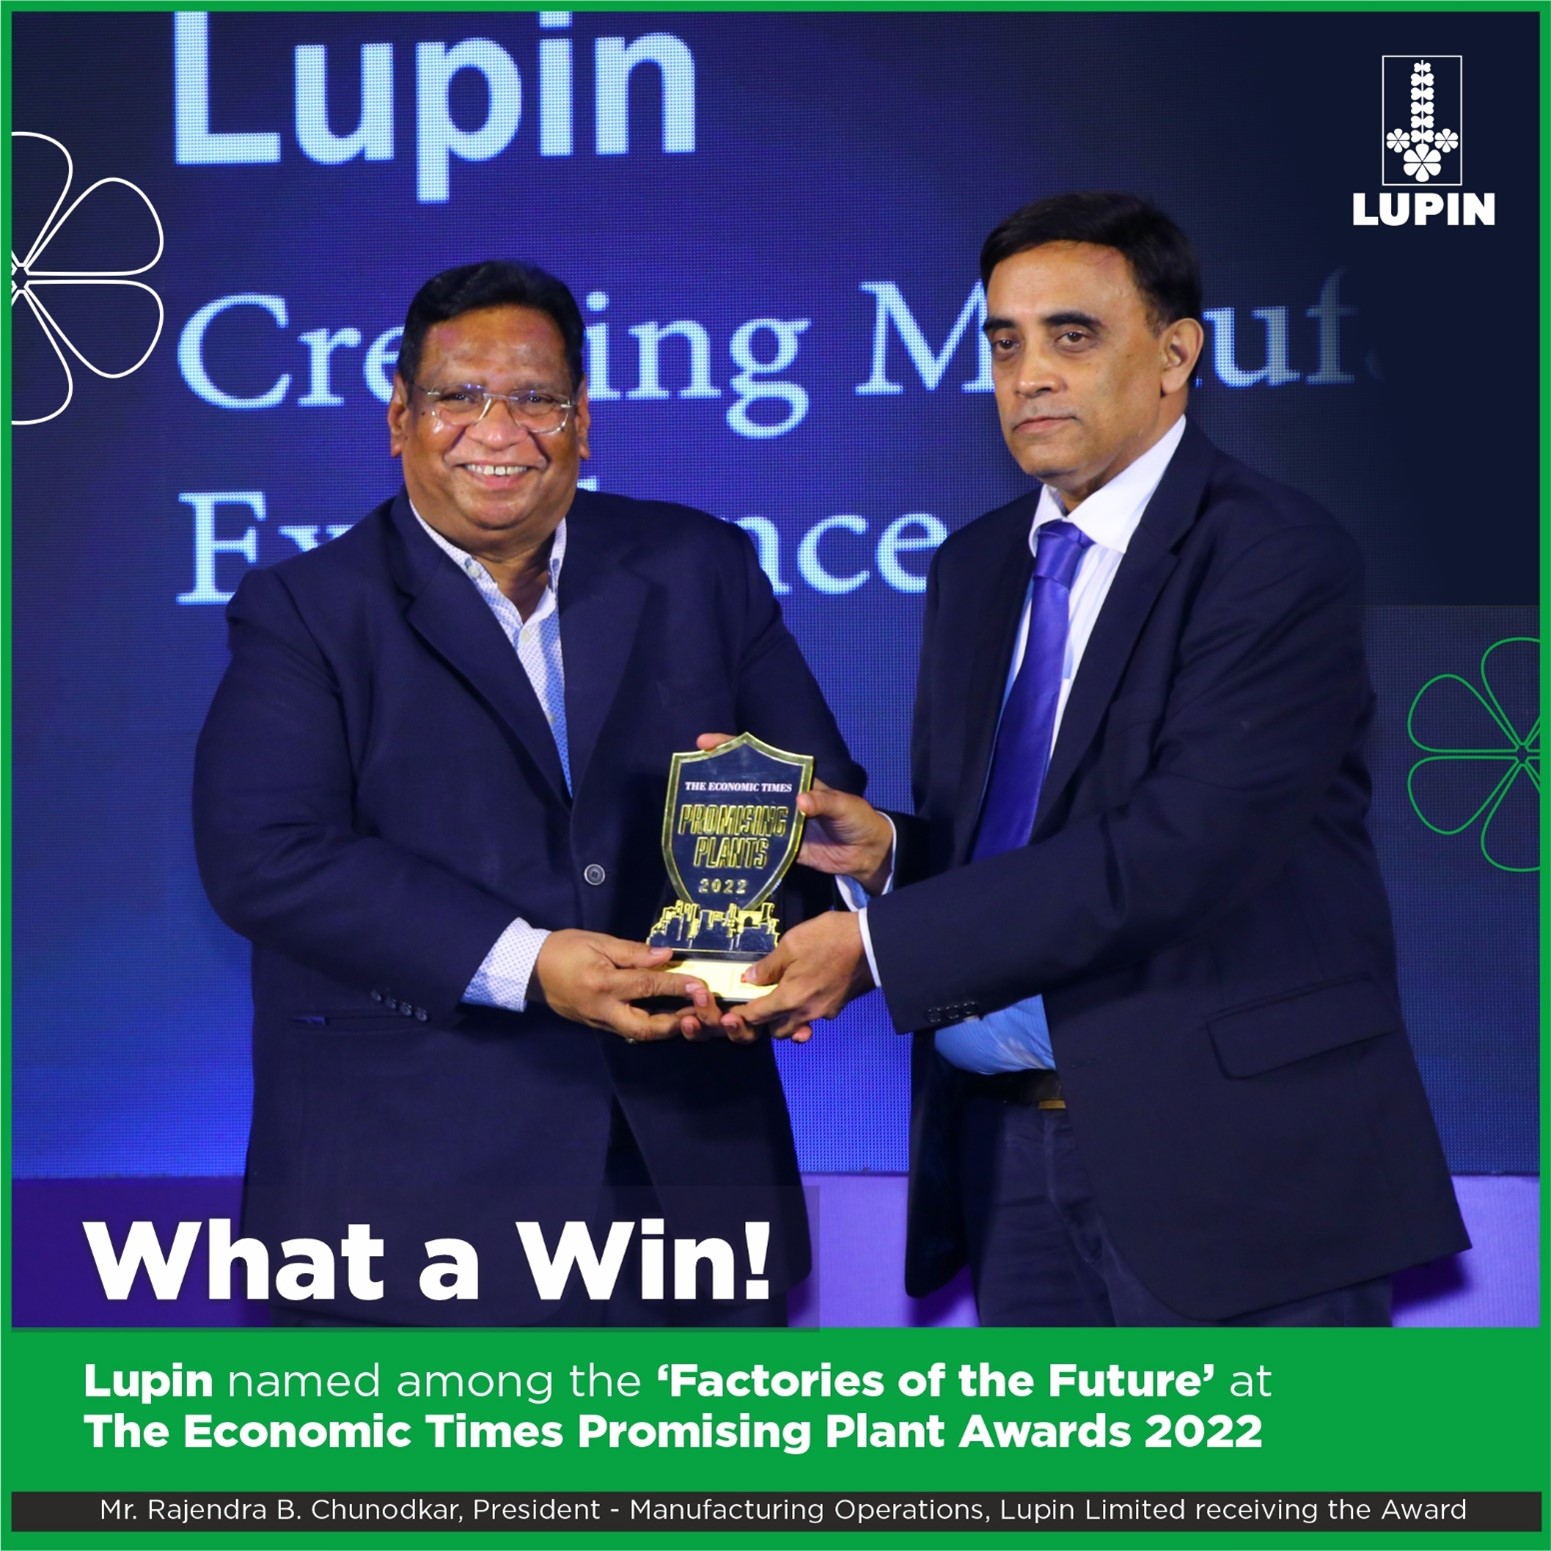 Lupin Named Among the ‘Factories of the Future’ at the Economic Times Promising Plant Awards 2022.